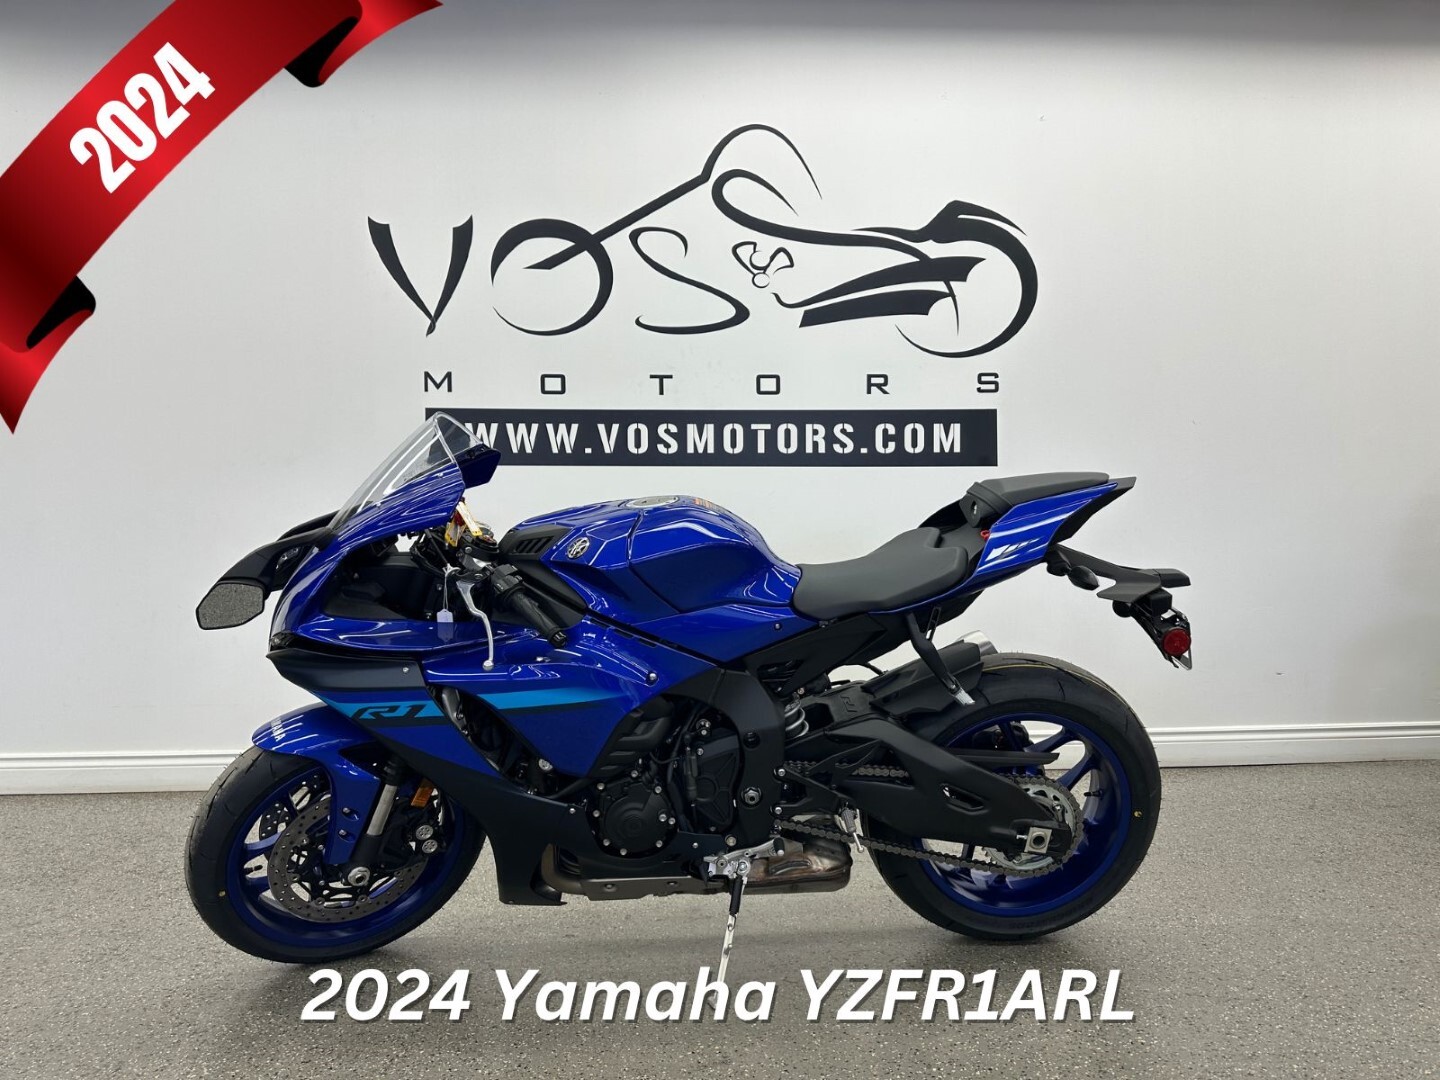 2024 Yamaha YZFR1ARL YZFR1ARL - V6026NP - -No Payments for 1 Year**